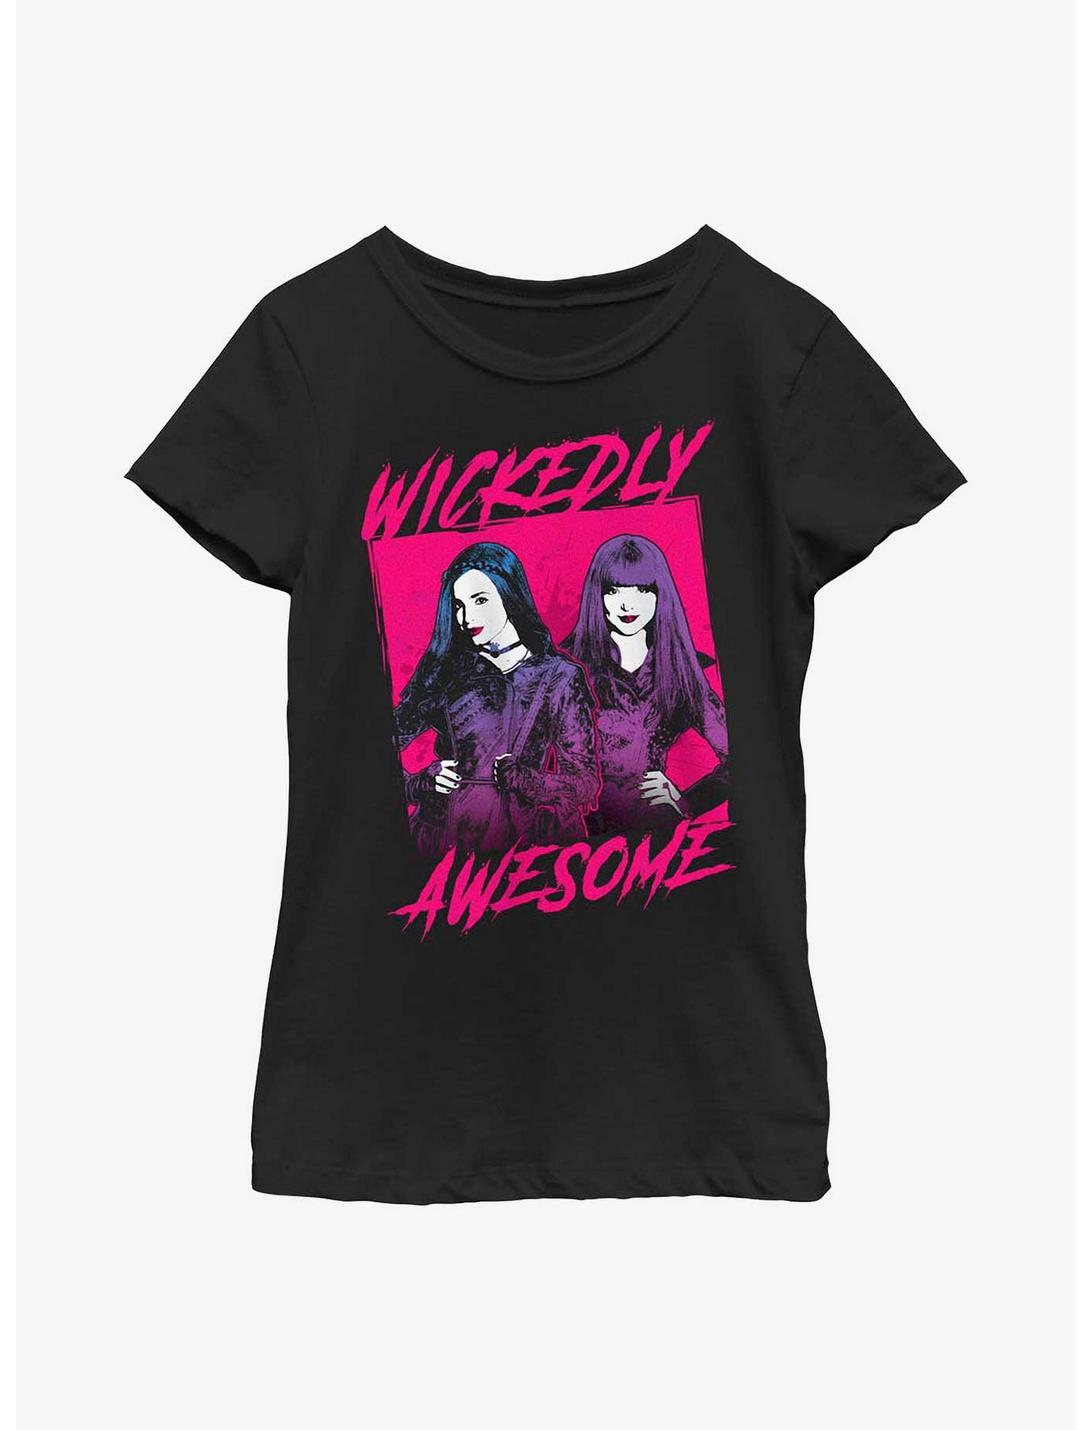 Disney Descendants Wickedly Awesome Youth Girls T-Shirt, BLACK, hi-res